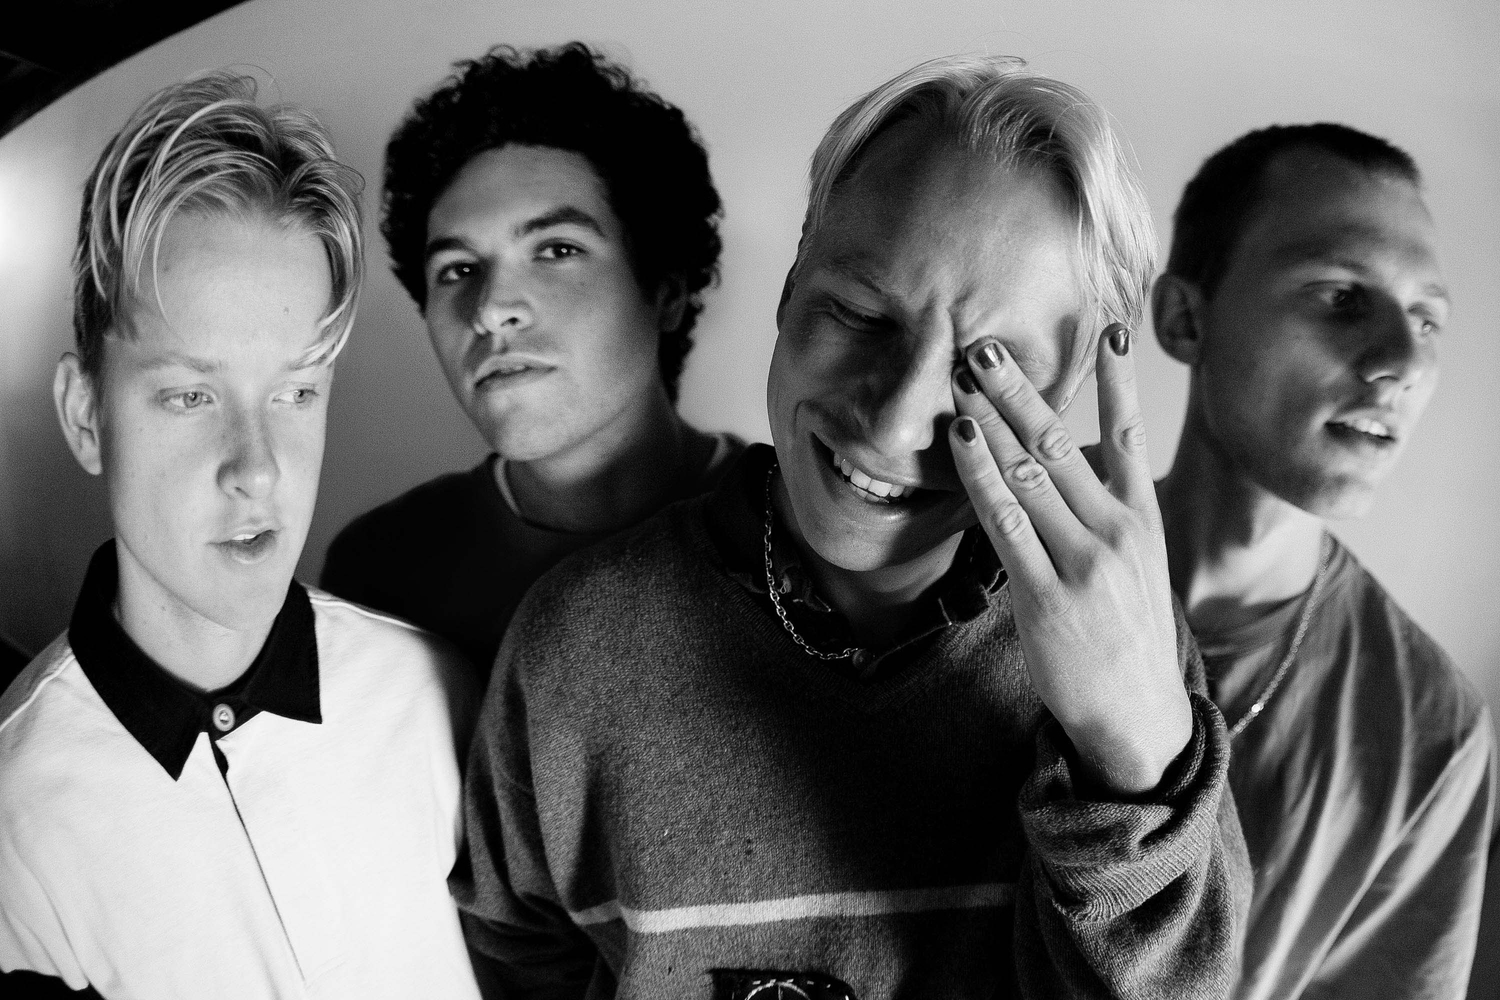 SWMRS release new video for ‘Lose Lose Lose’